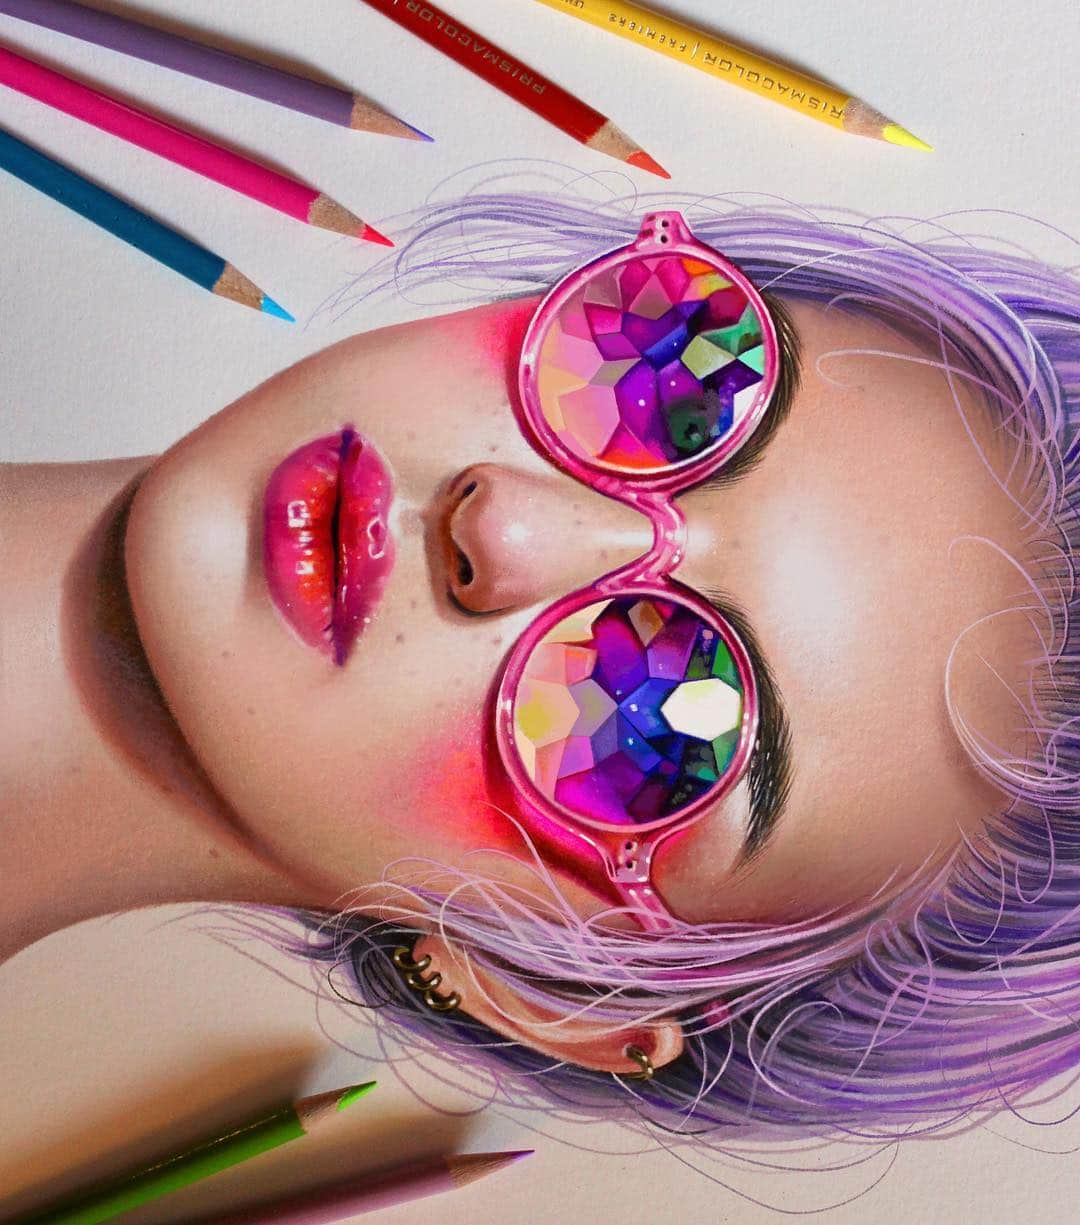 Morgan Davidsonのインスタグラム：「A fun work in progress shot from today! 📸 My inspiration for this drawing was I just really wanted to draw kaleidoscope glasses, lol. 😂🌈👓 Debating on whether or not I’ll add a background after I finish her. 🤔 Also, it’s Prismacolor colored pencil over a Prismacolor marker base on Strathmore Bristol smooth paper! ❤️」